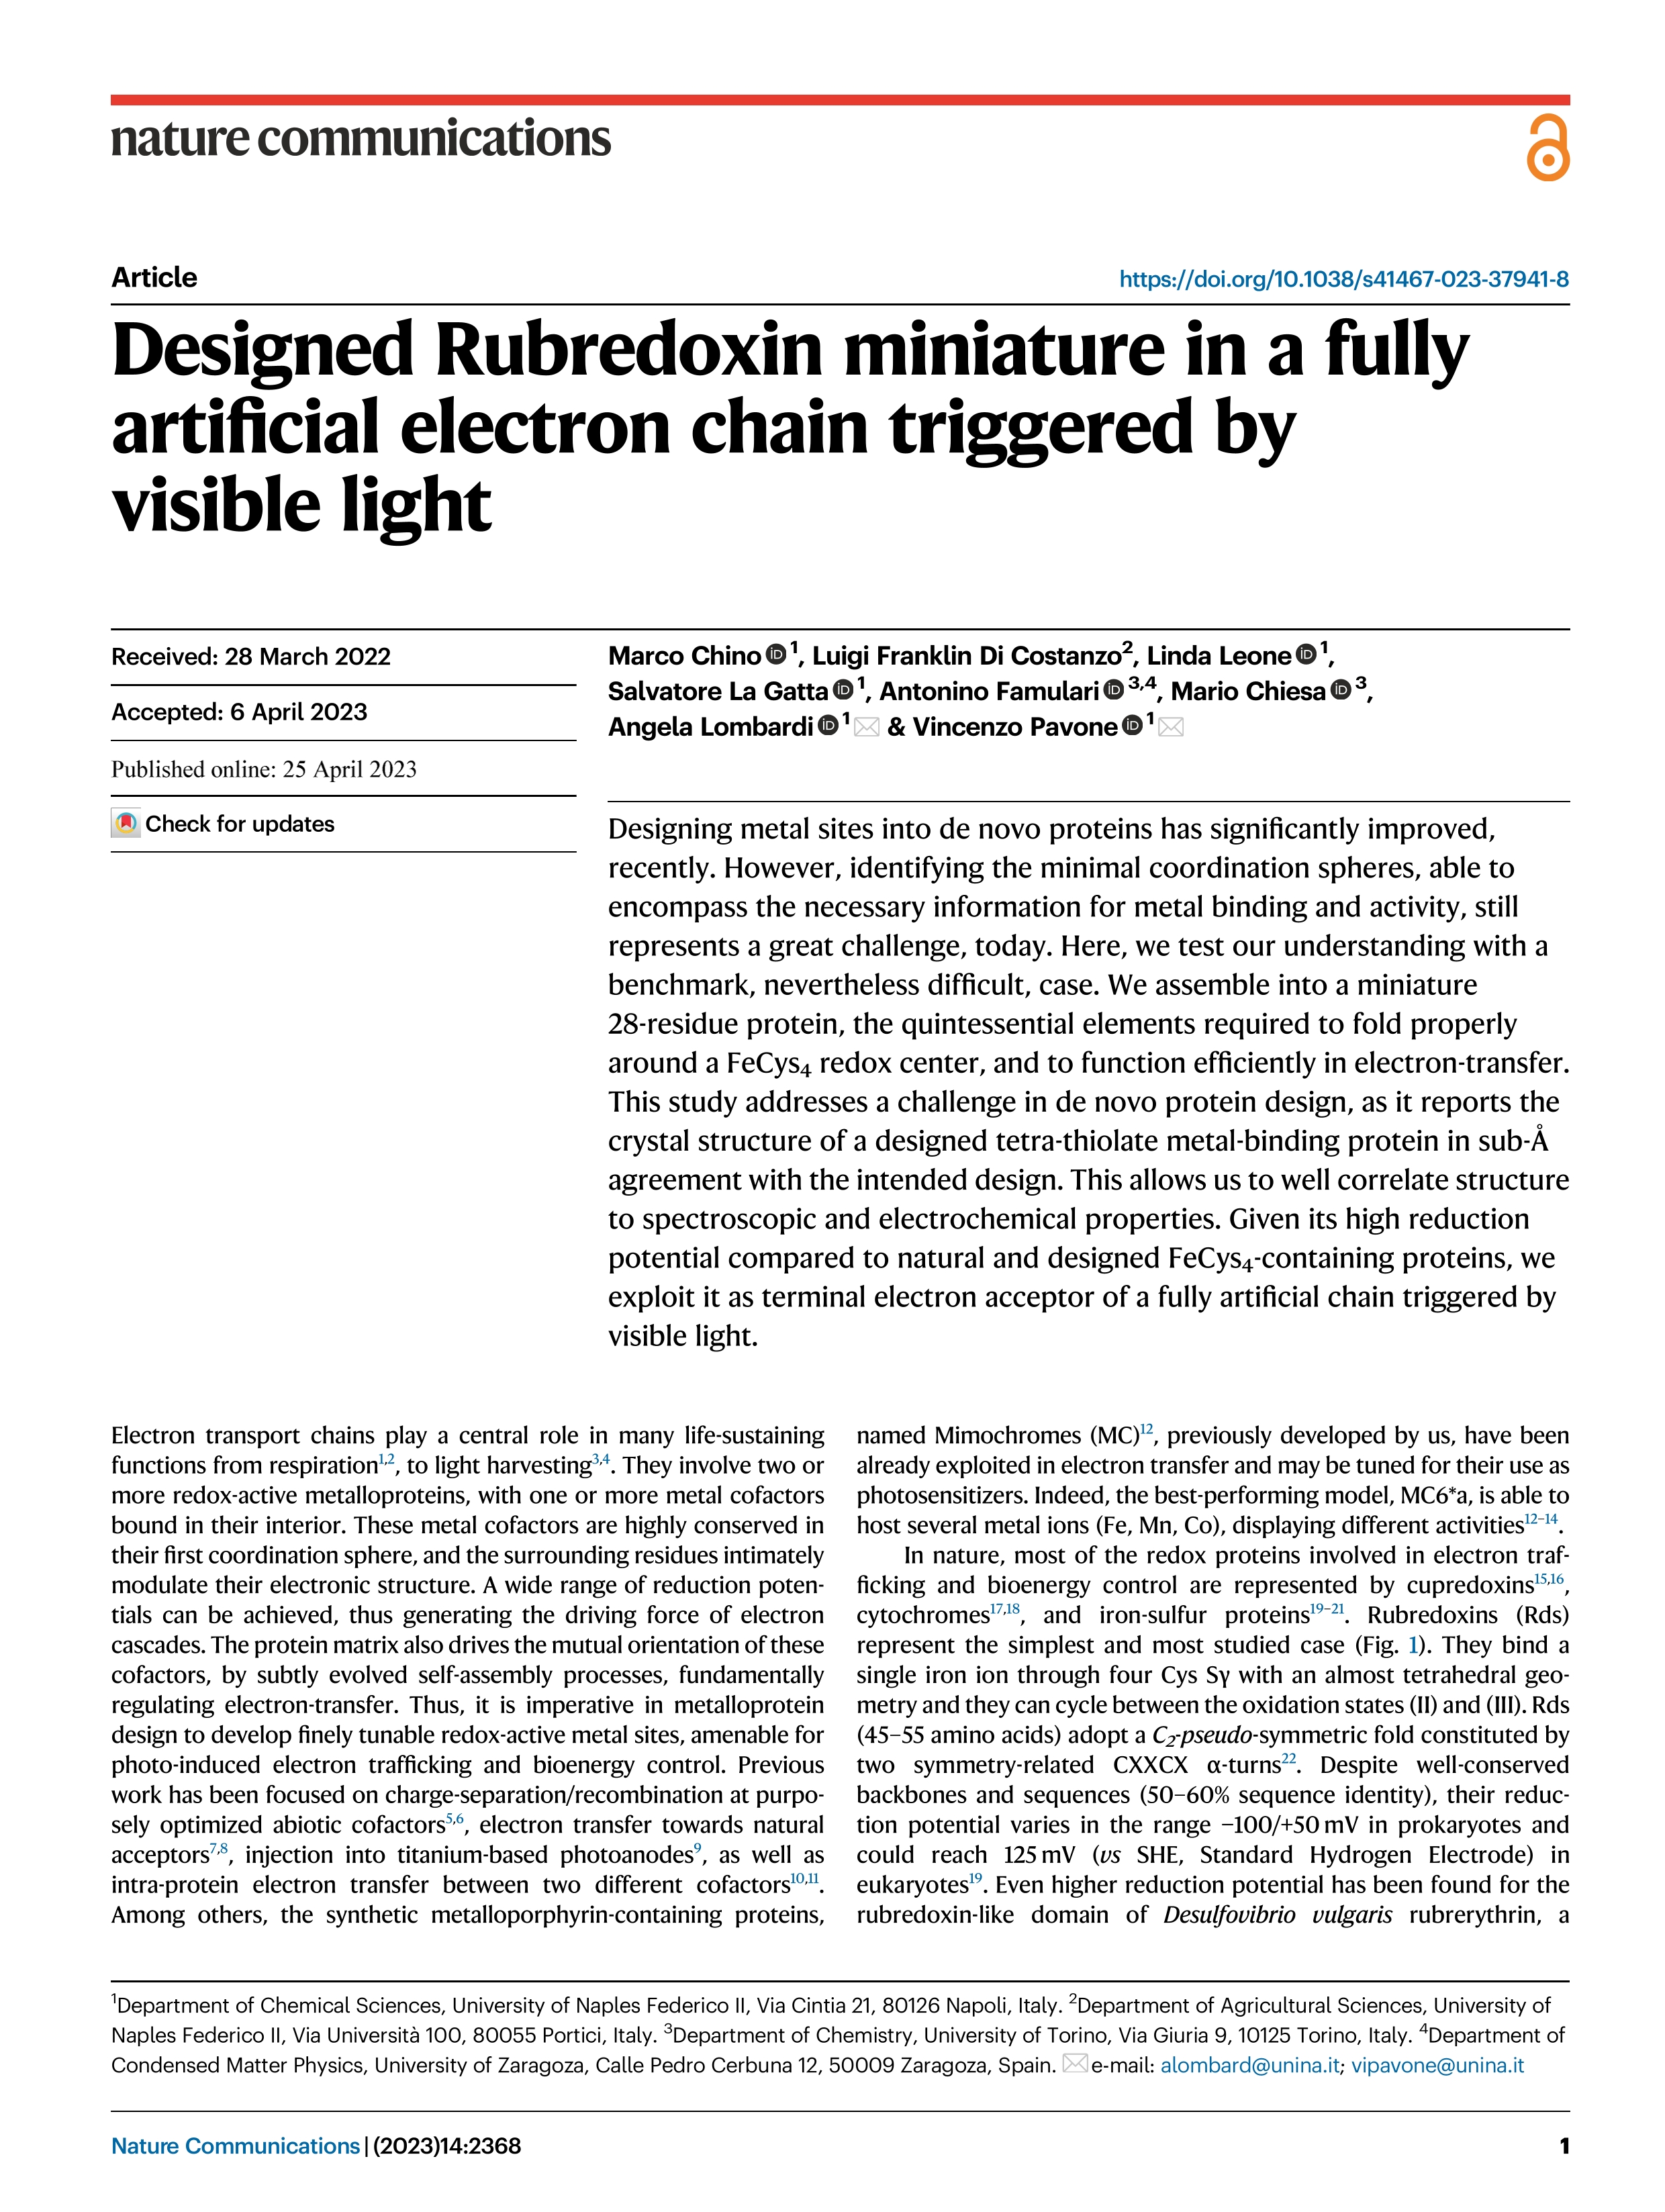 Designed Rubredoxin miniature in a fully artificial electron chain triggered by visible light